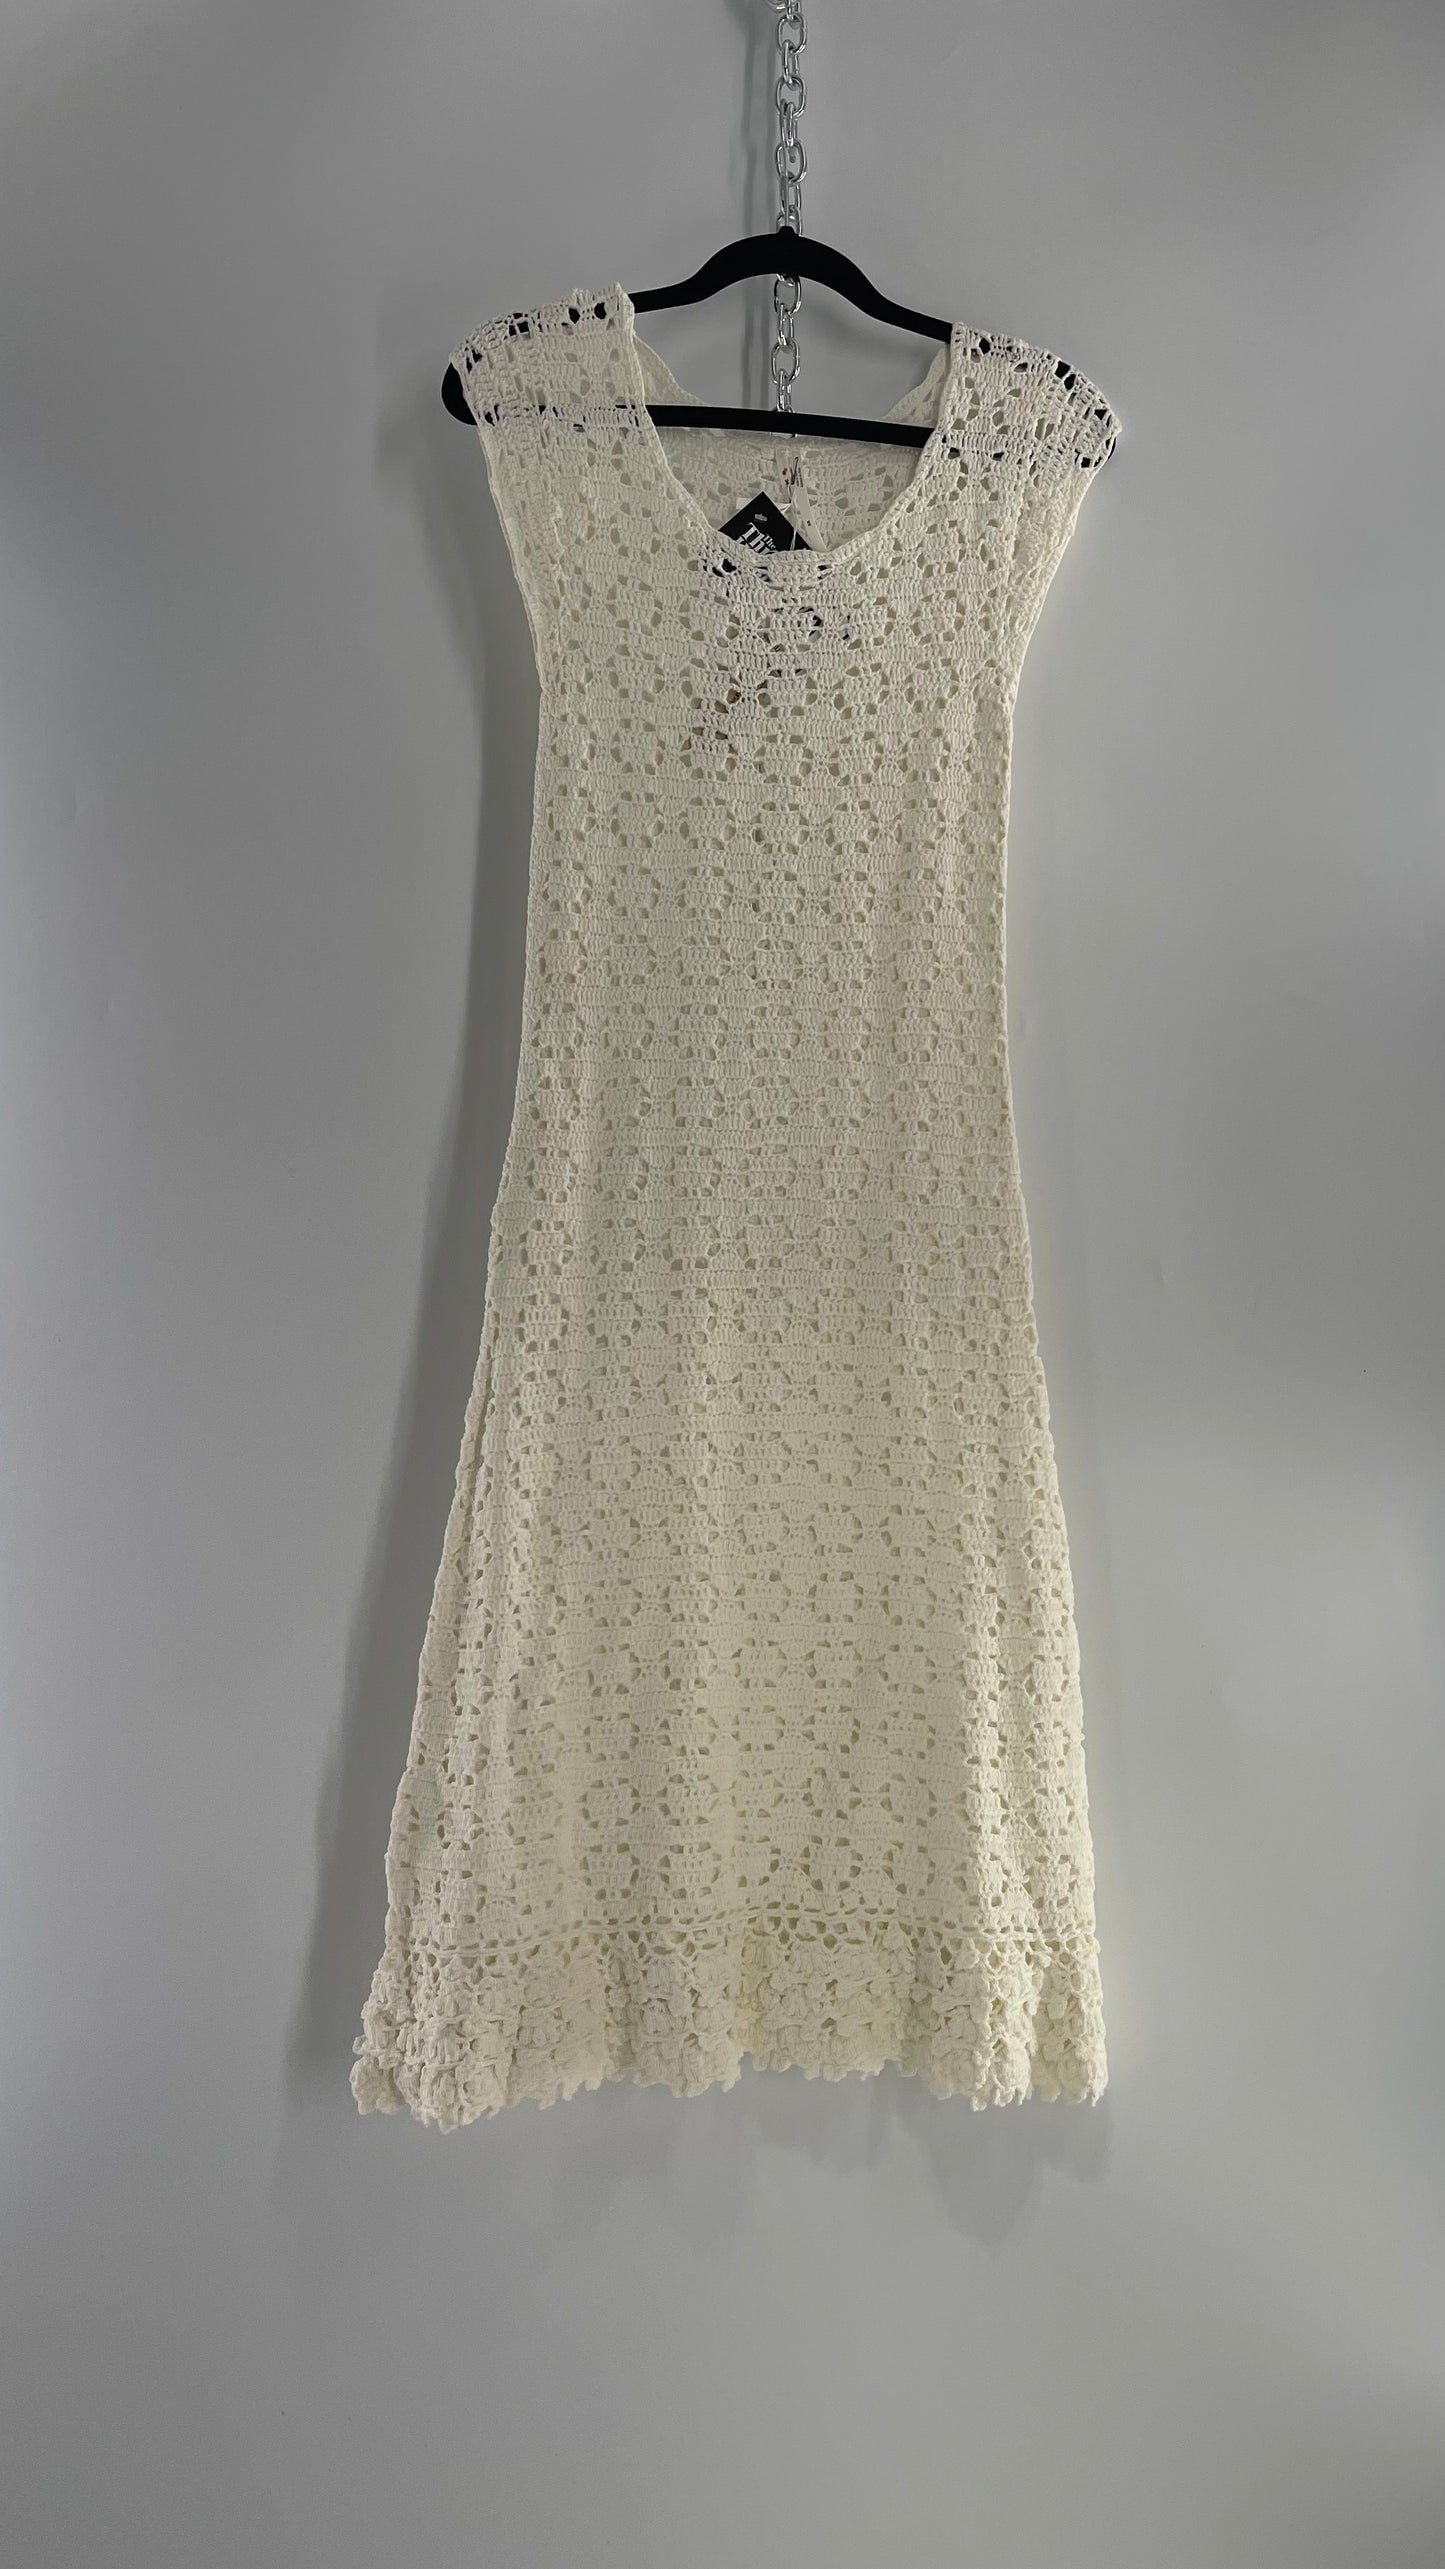 Anthropologie White Crochet Knit MIDI Dress with Tags Attached